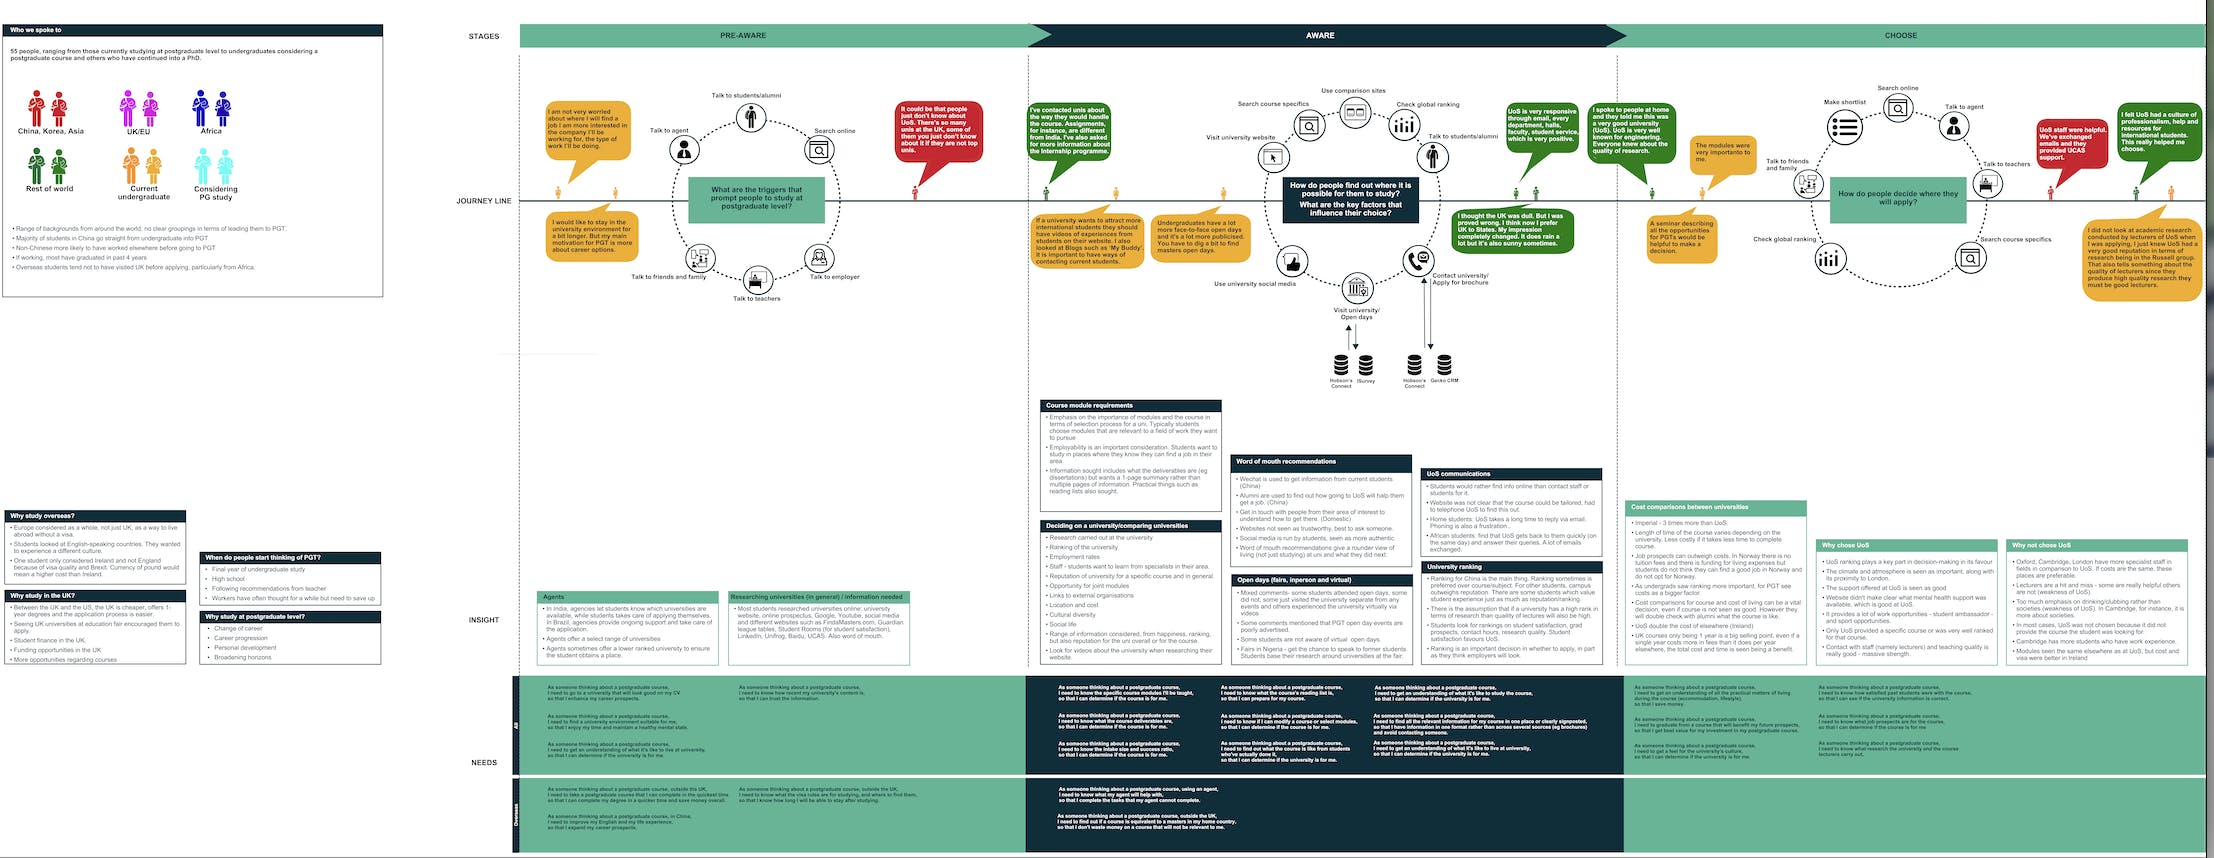 User journey service map example.png